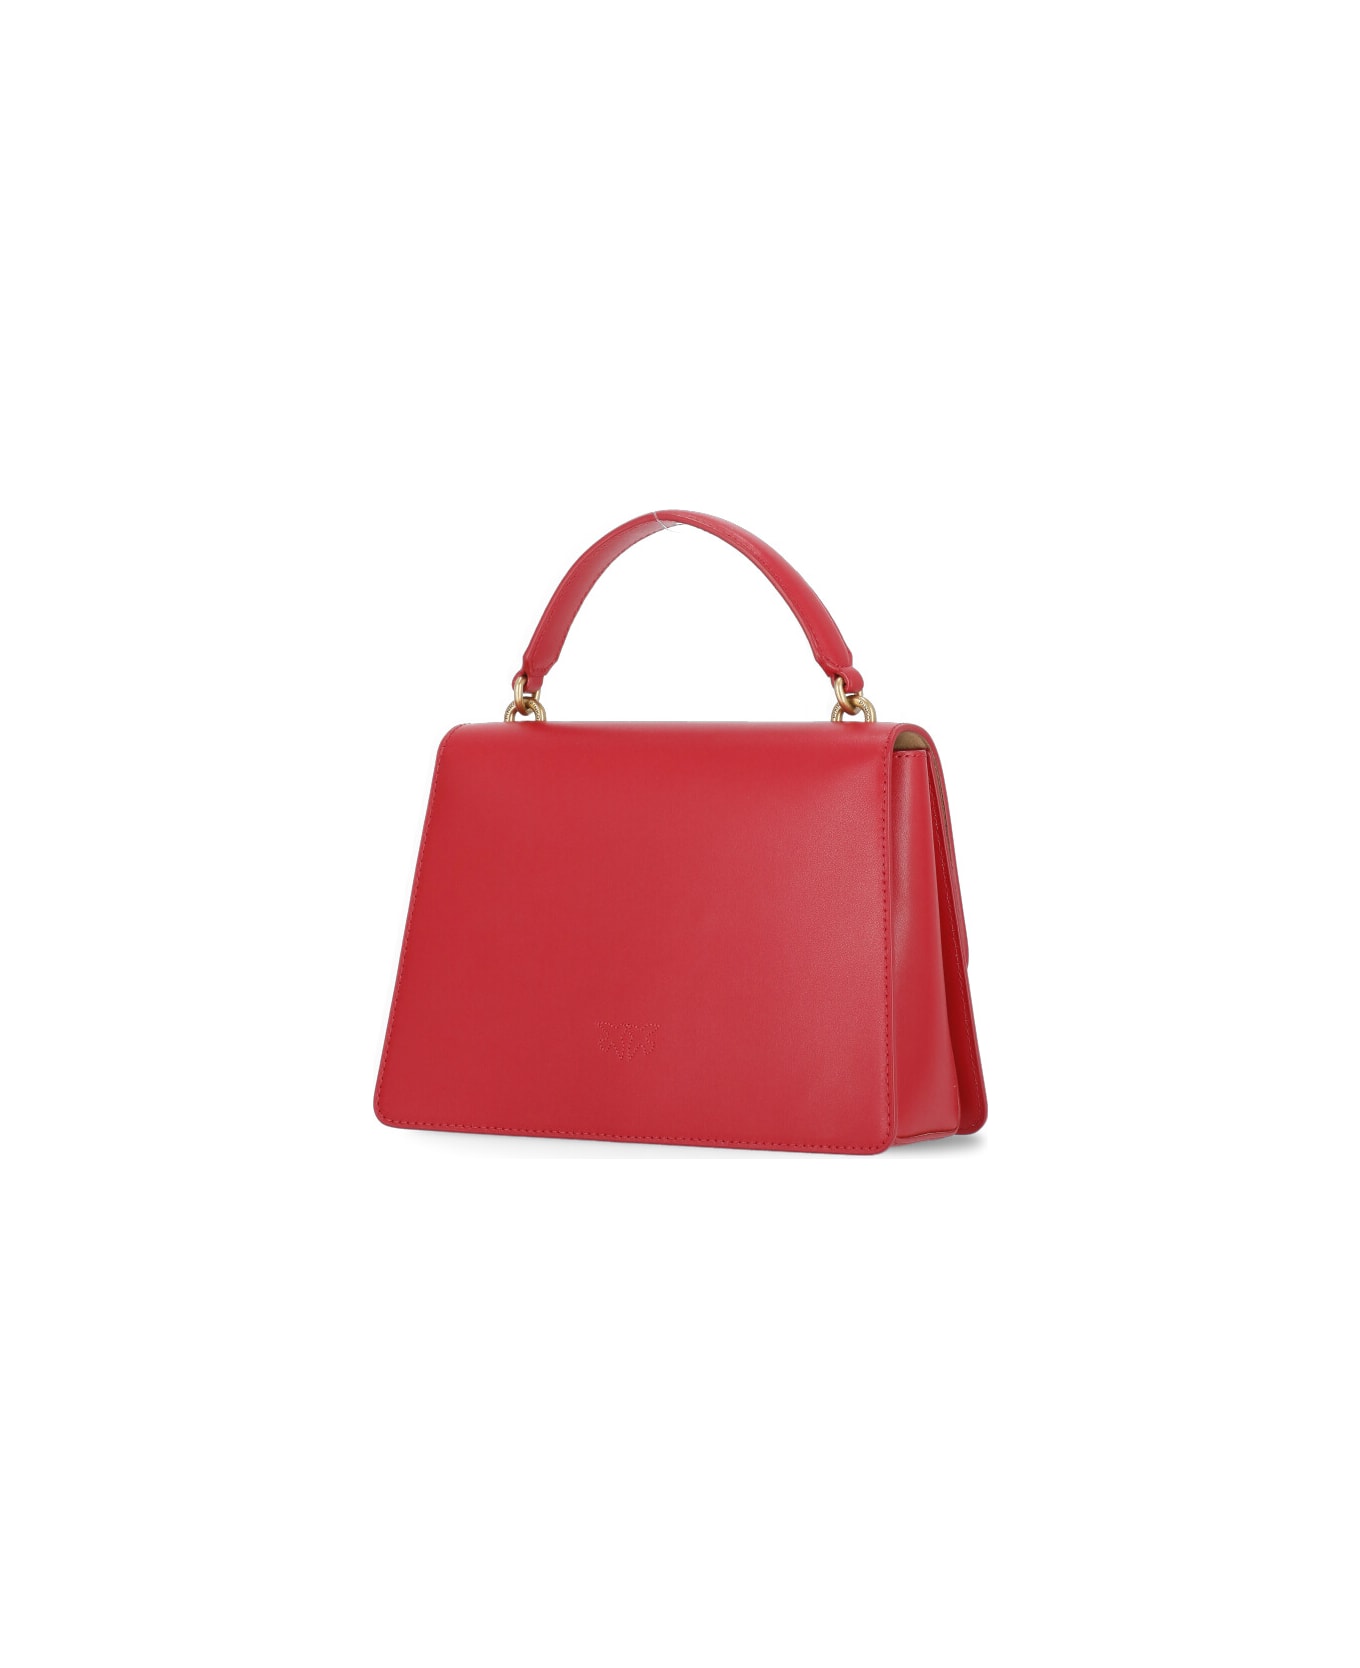 Pinko Love One Top Handle Bag - Red